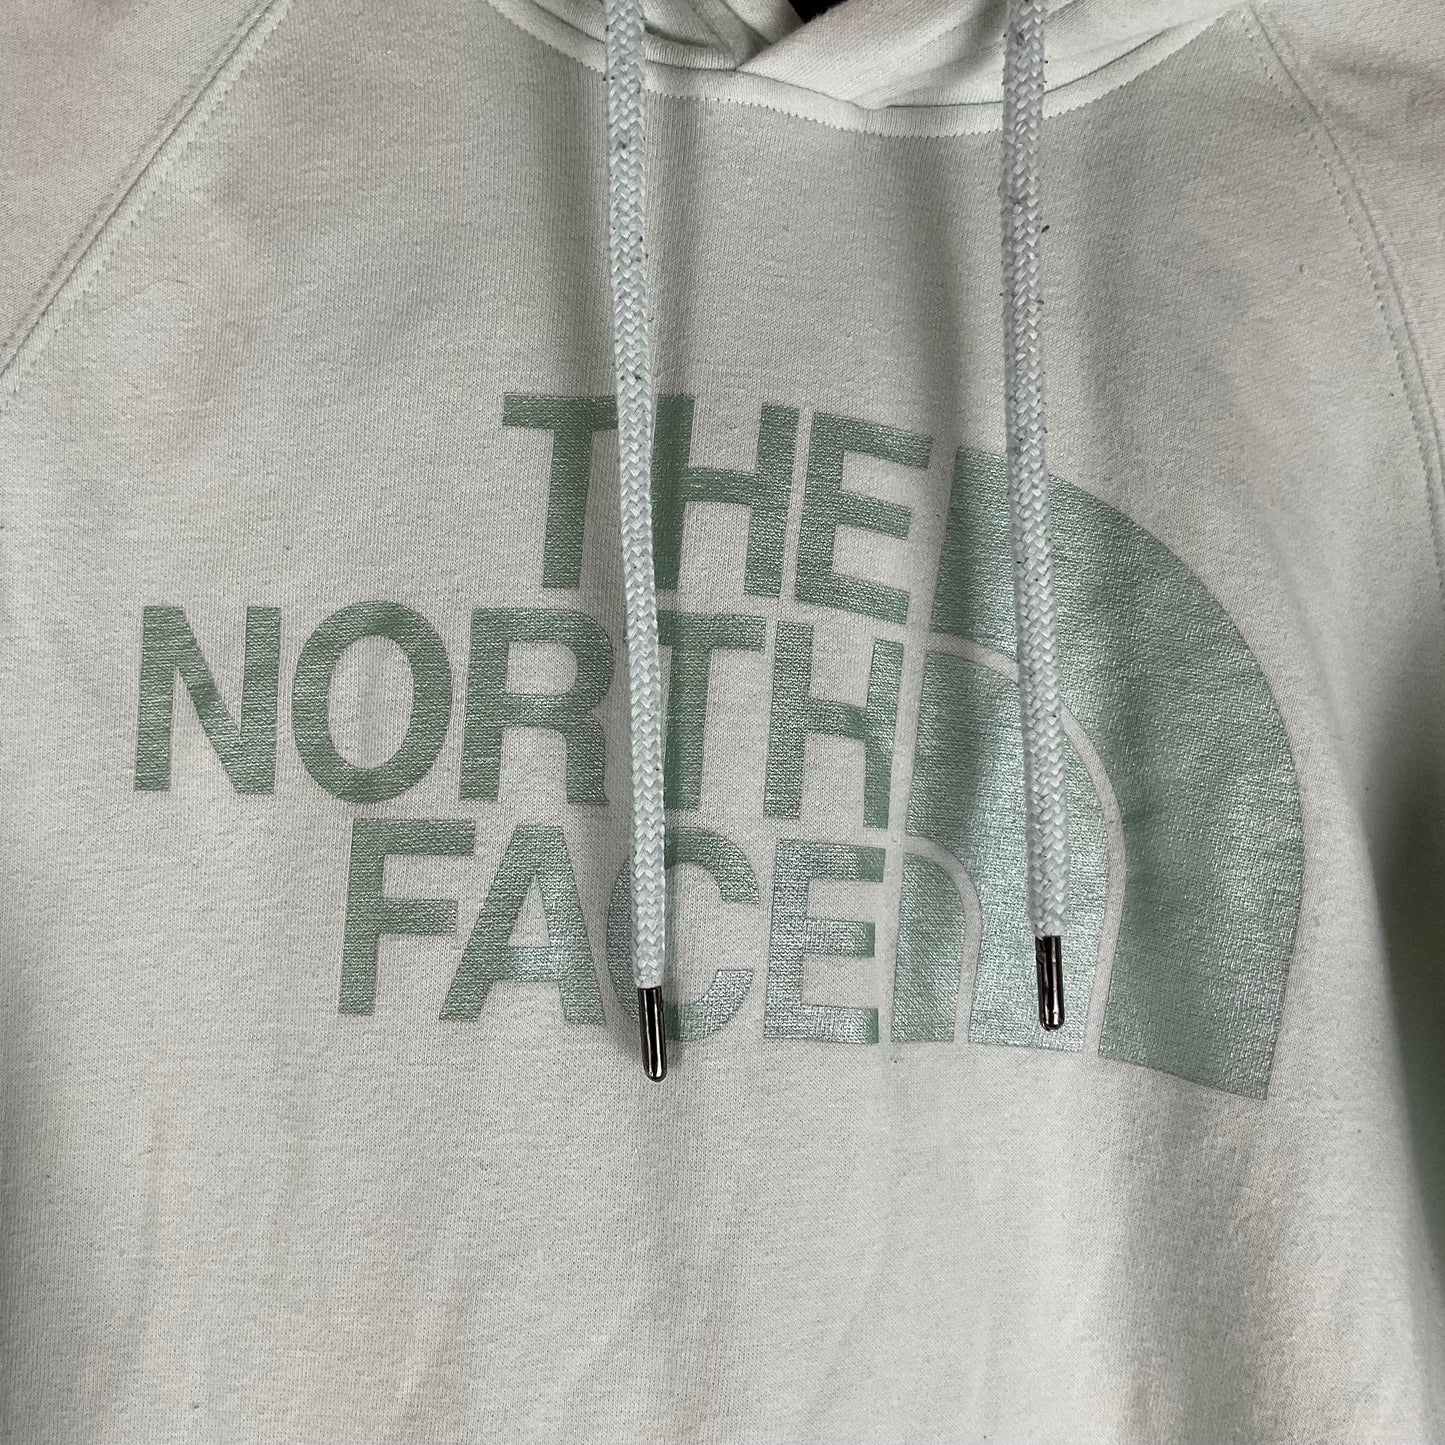 Jacket Designer By North Face  Size: S